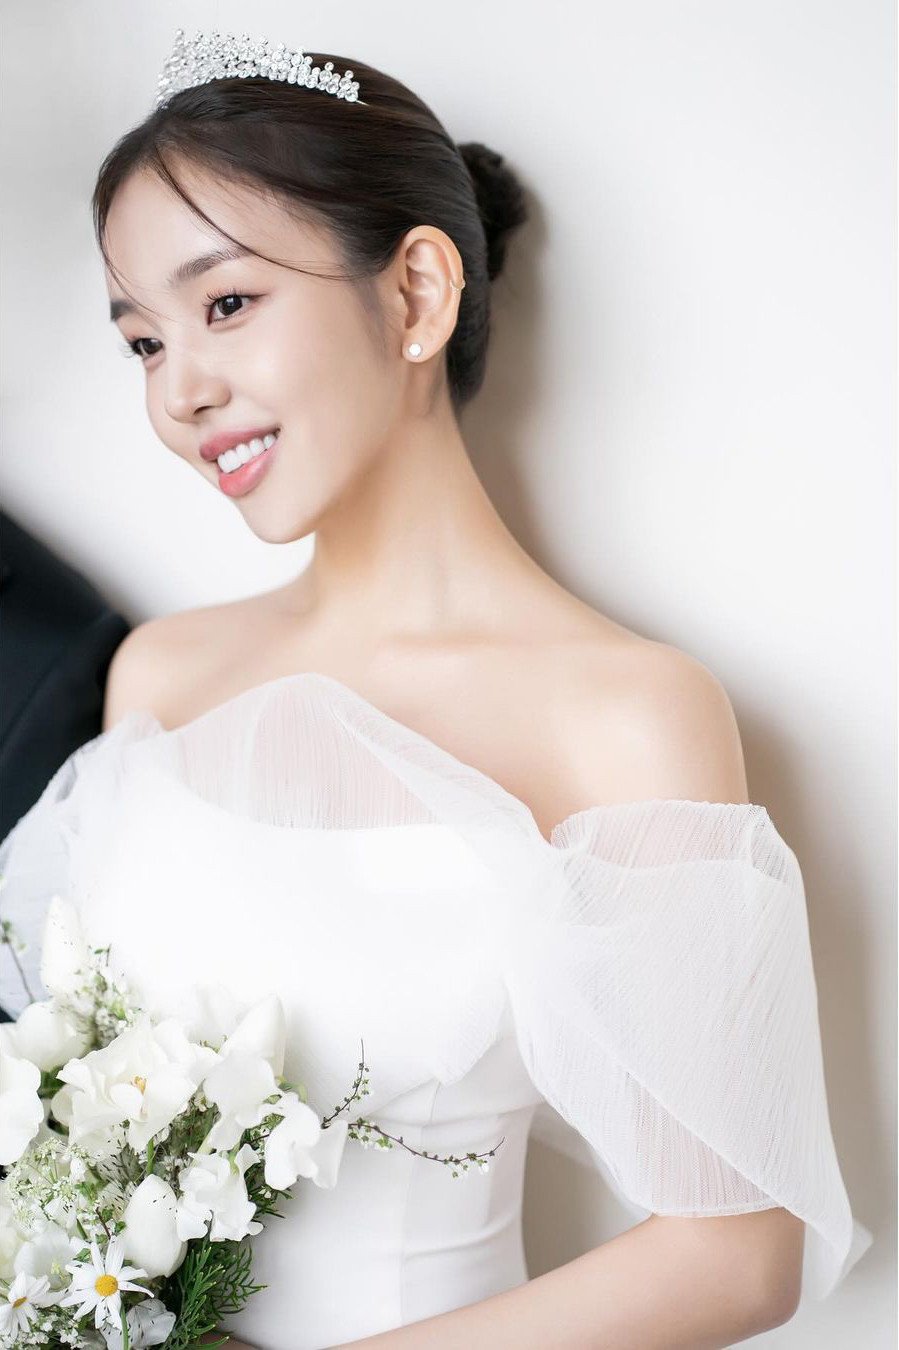 Singer Baek Ah Yeon shares gorgeous cuts from her wedding photoshoot ...